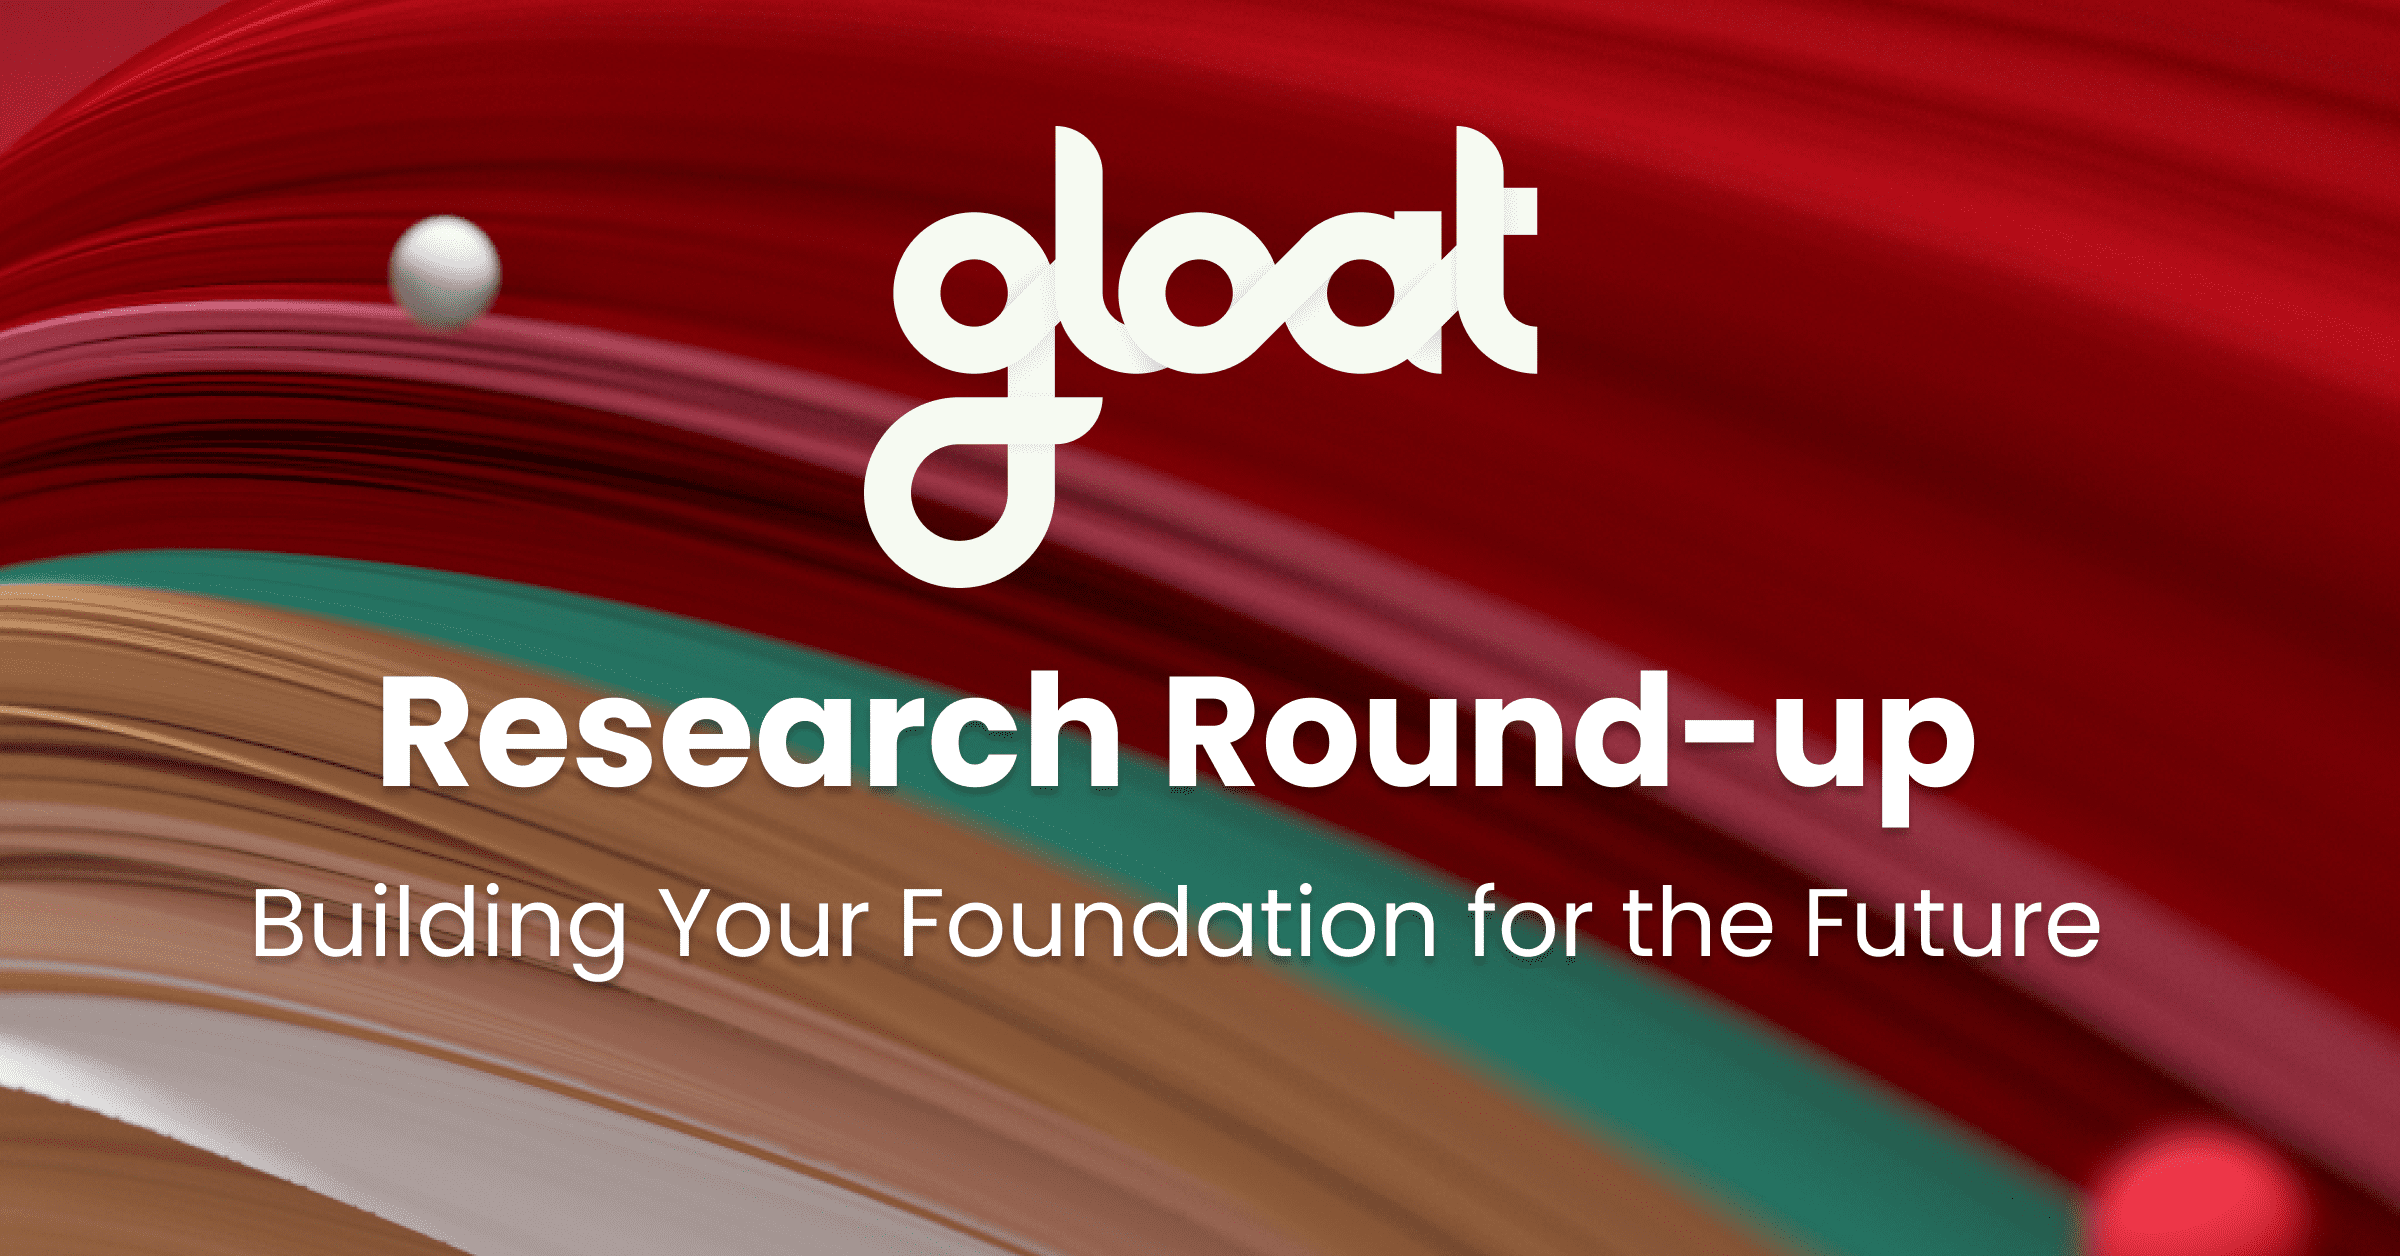 November research round-up